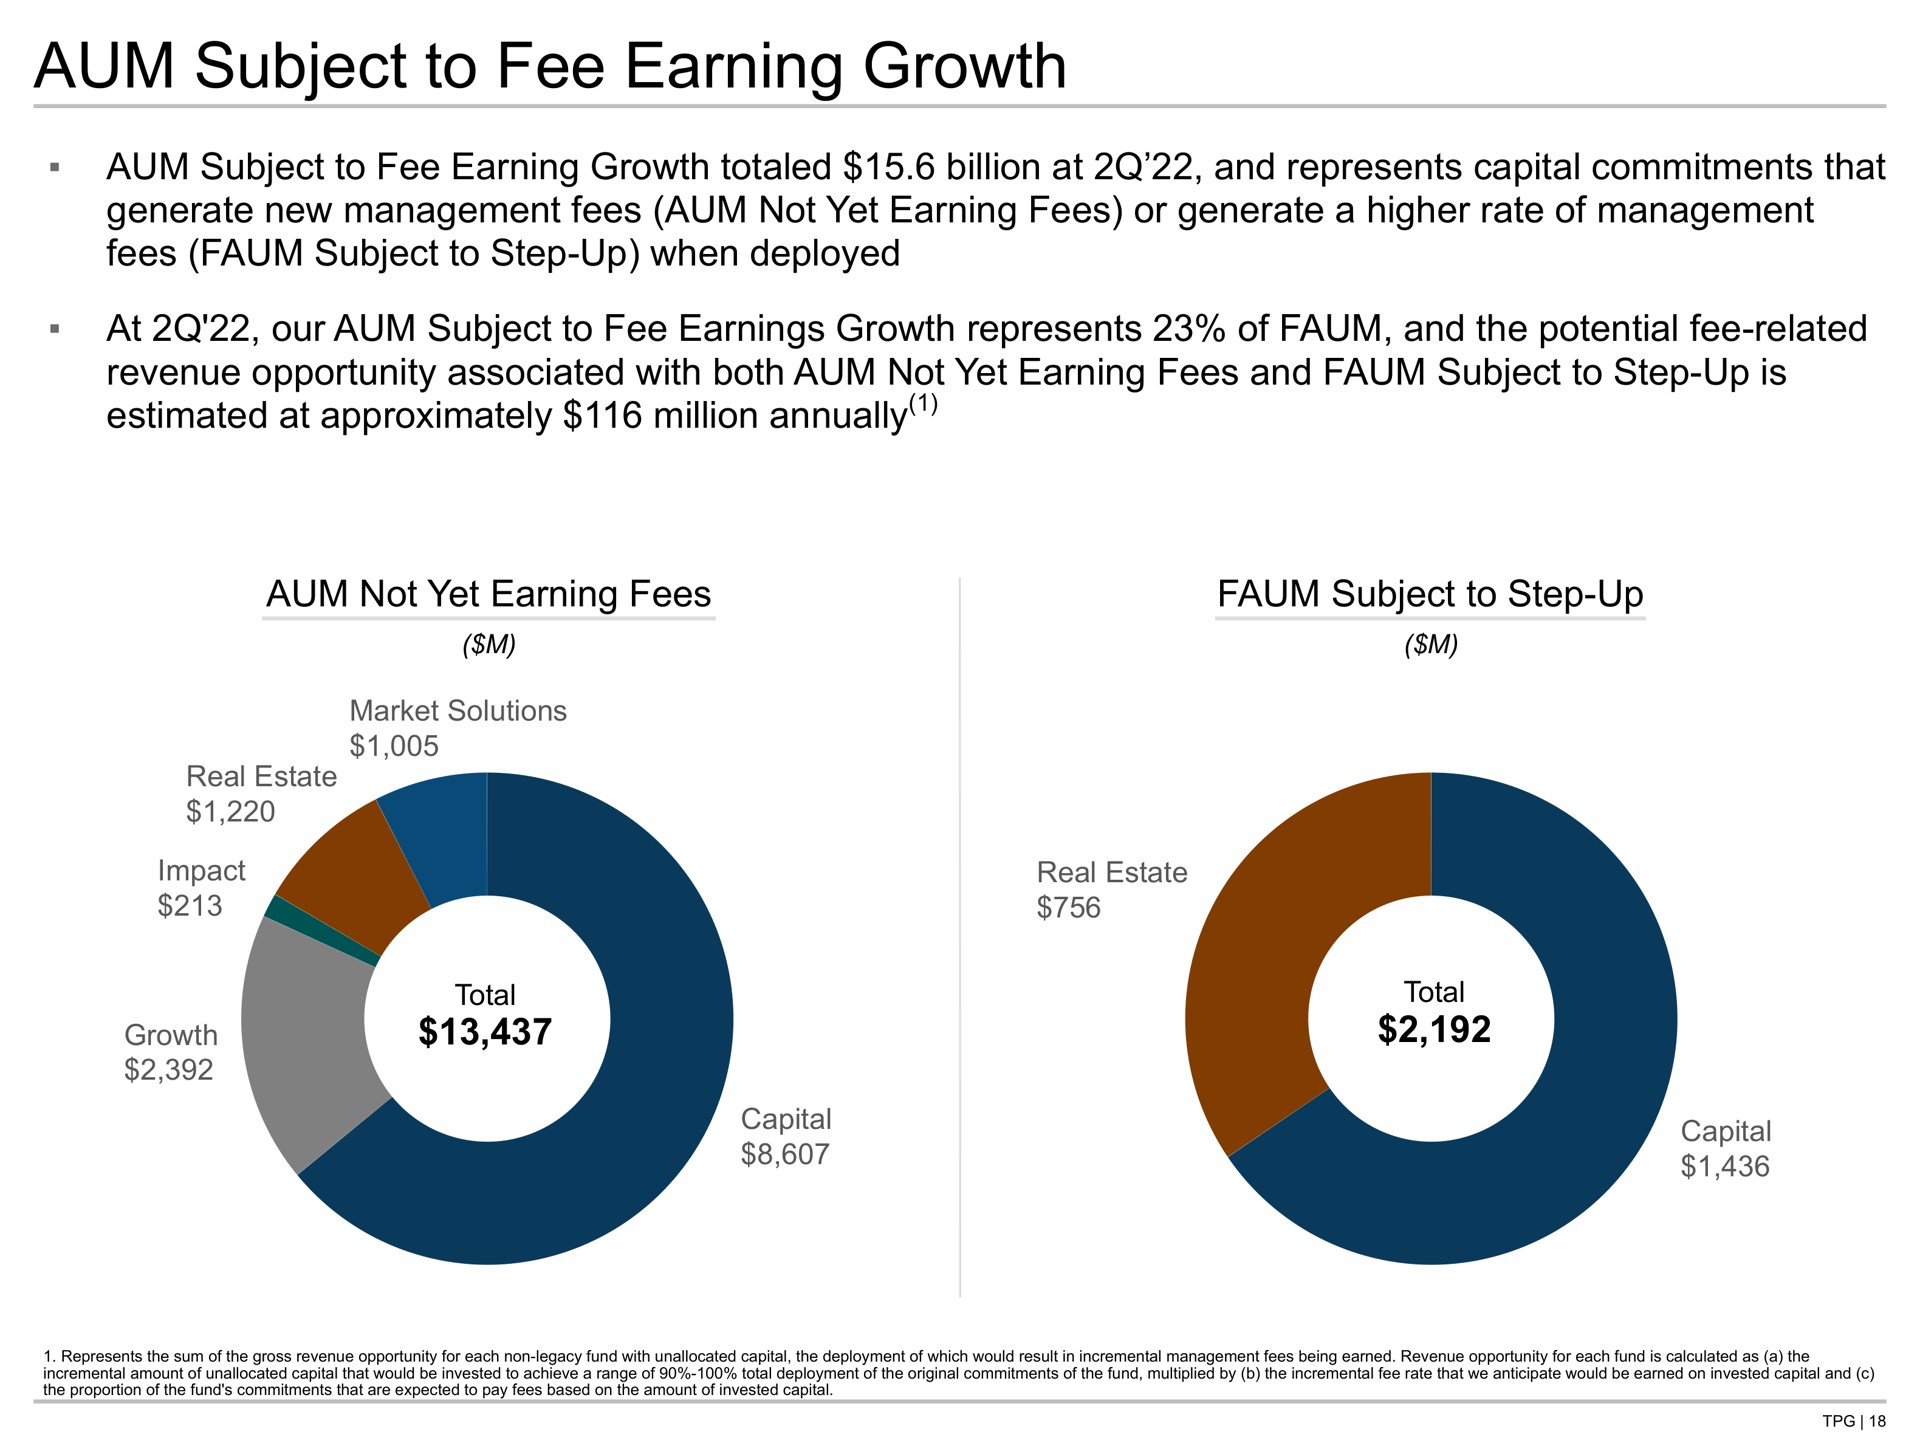 aum subject to fee earning growth totaled billion at and represents capital commitments that generate new management fees not yet fees or generate a higher rate of management fees step up when deployed at our earnings represents of and the potential fee related revenue opportunity associated with both not yet fees and step up is estimated at approximately million annually not yet fees step up | TPG